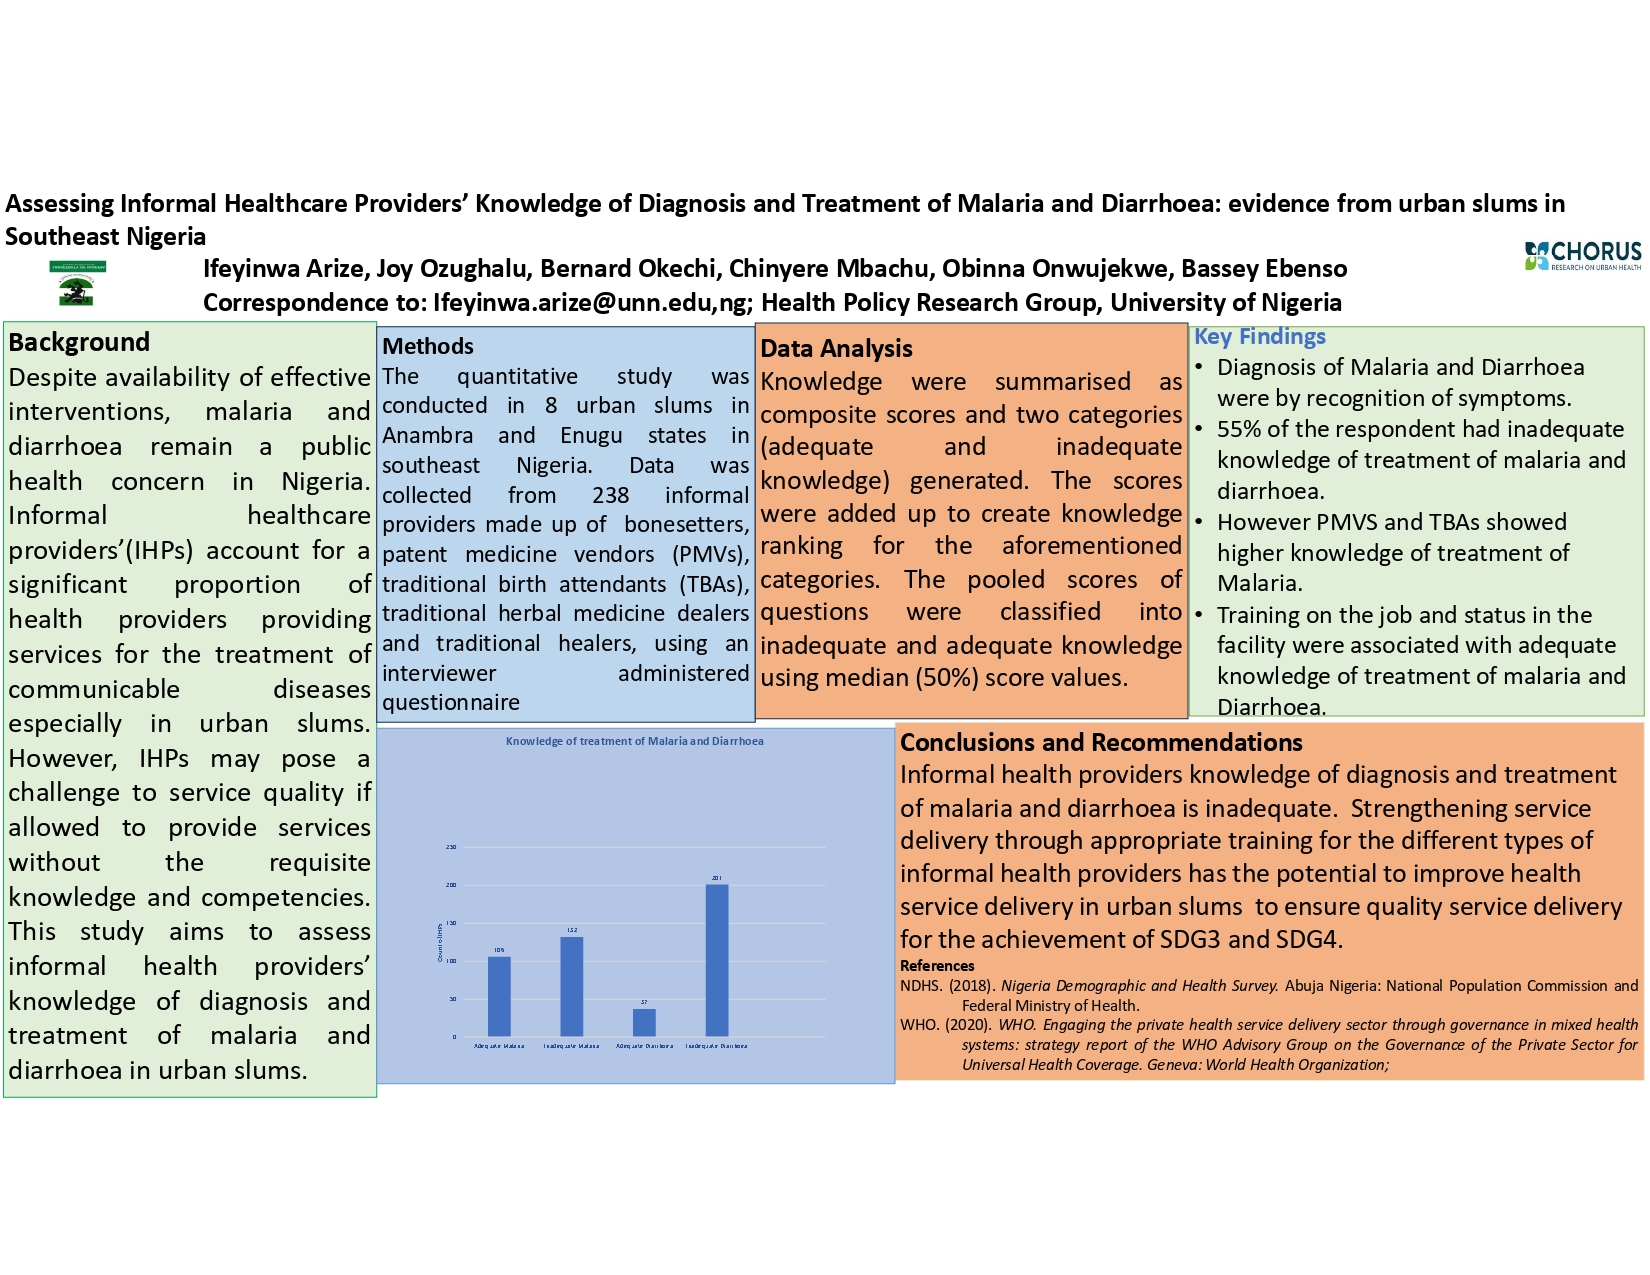 Assessing Informal Healthcare Providers’ Knowledge of Diagnosis and Treatment of Malaria and Diarrhoea: evidence from urban slums in Southeast Nigeria